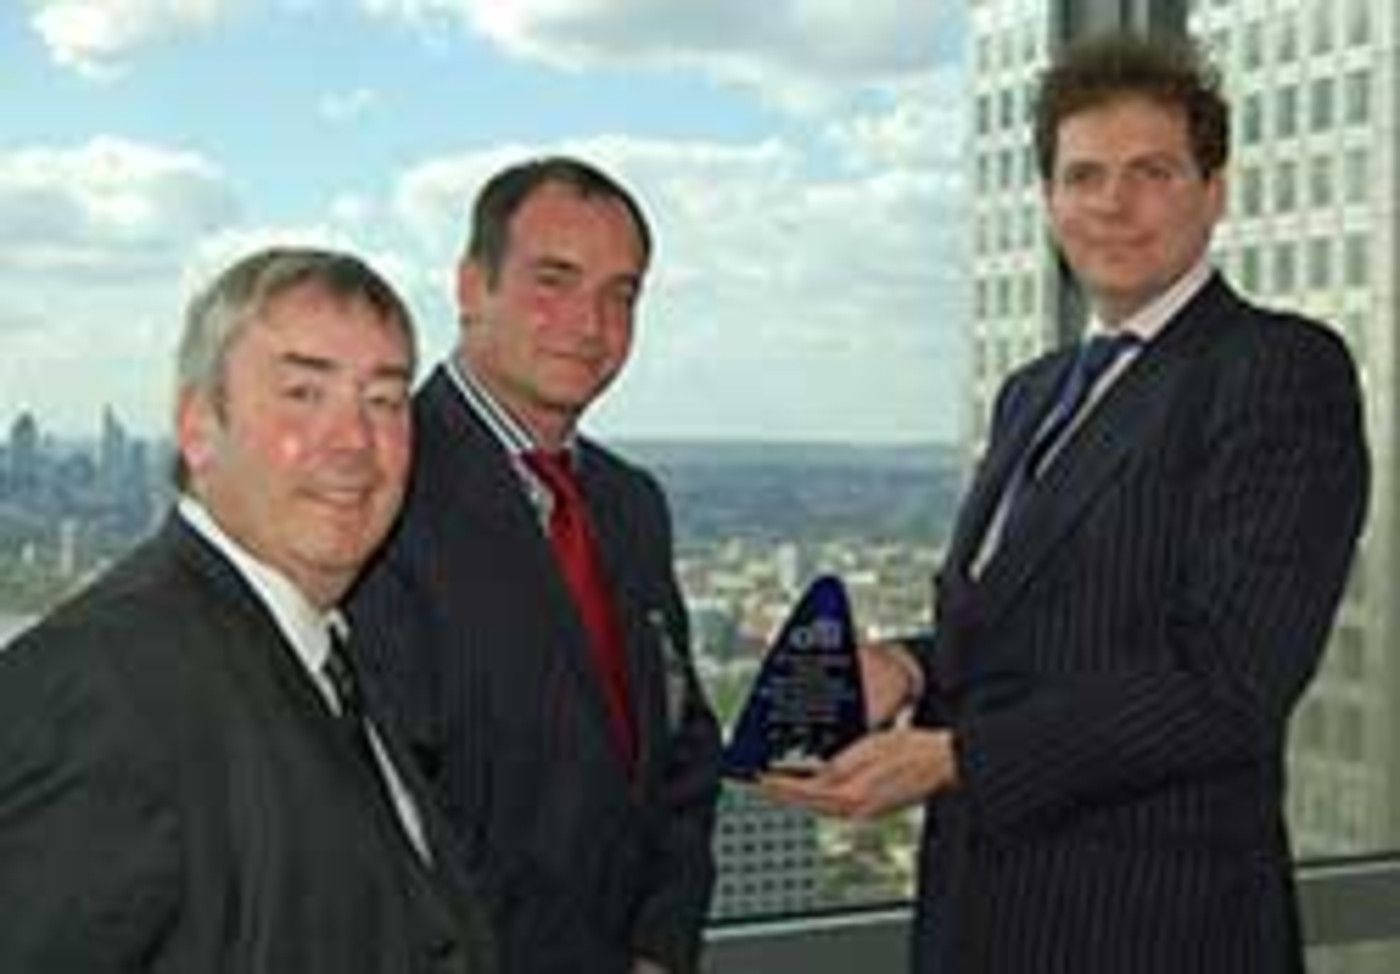 Citi global sustainable vendor of the year